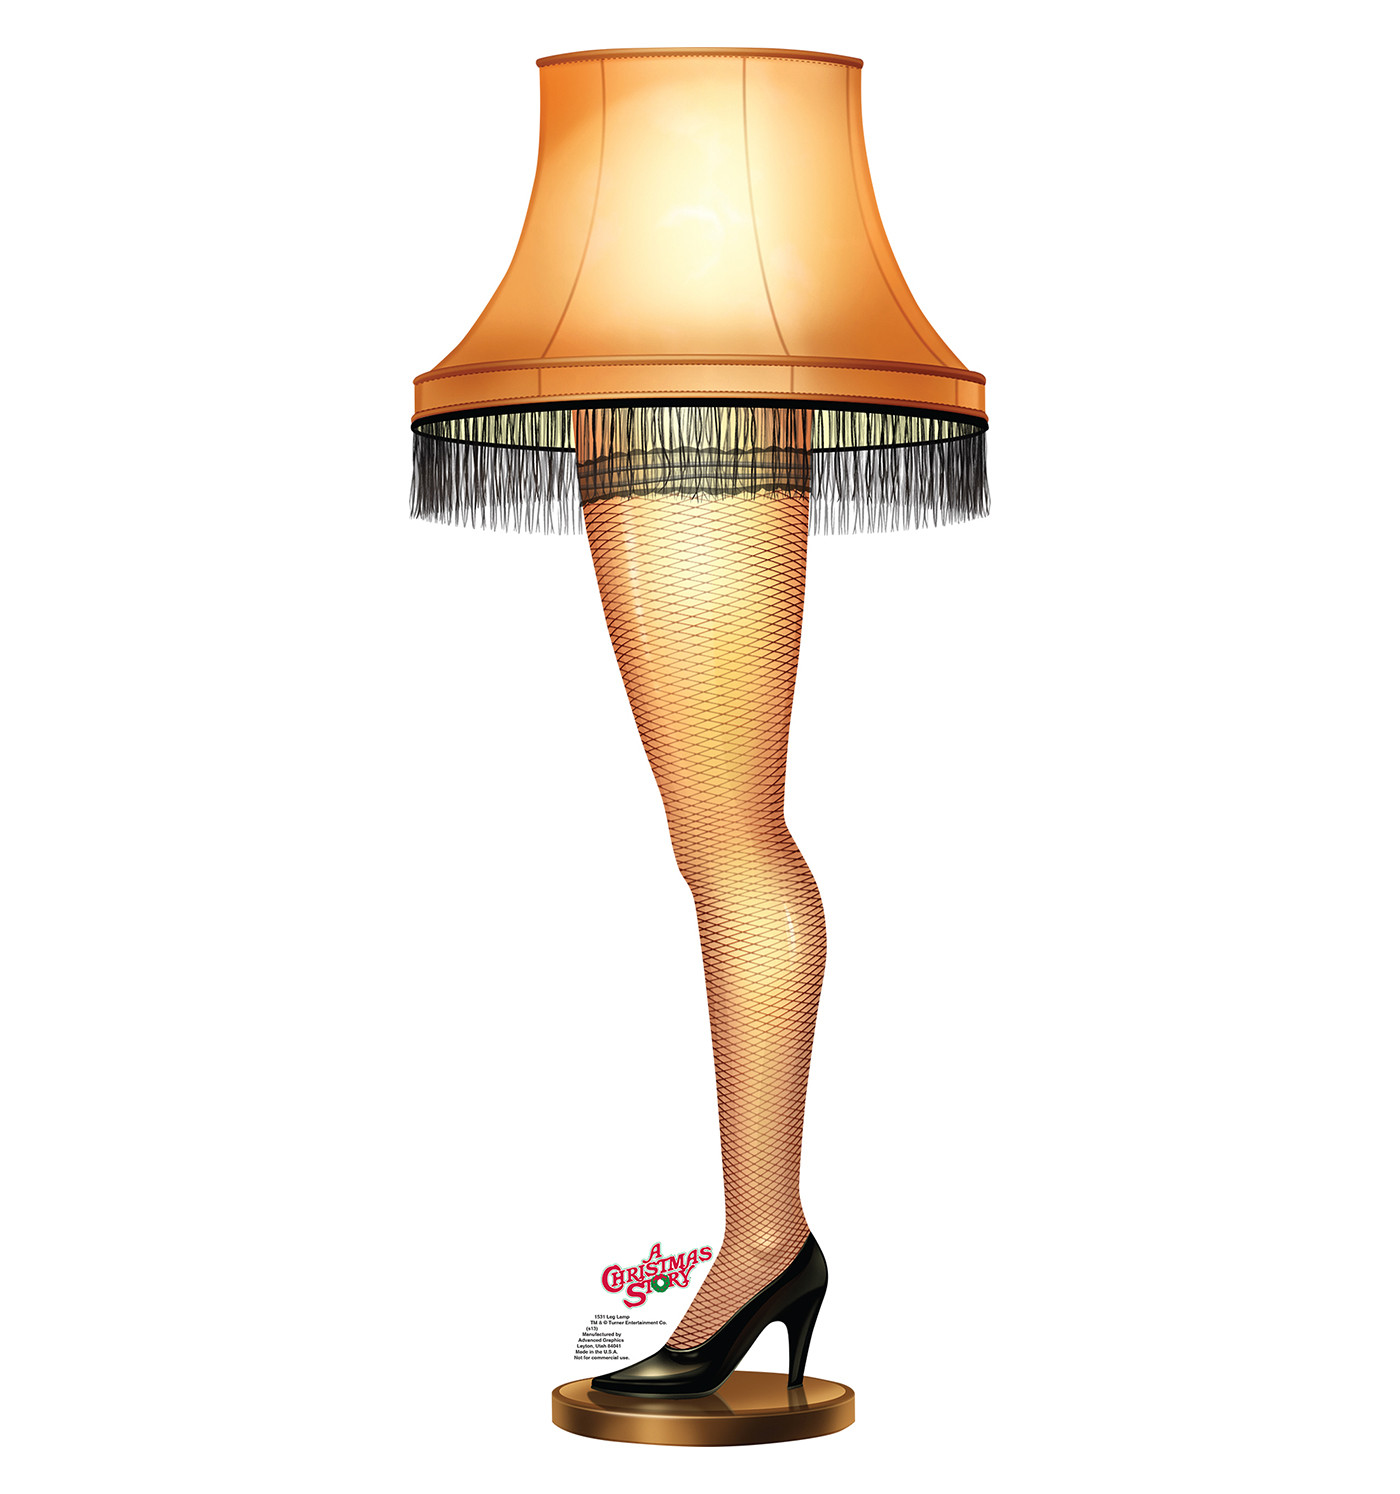 Christmas Story Lamp Full Size
 Lamp clipart a christmas story Pencil and in color lamp